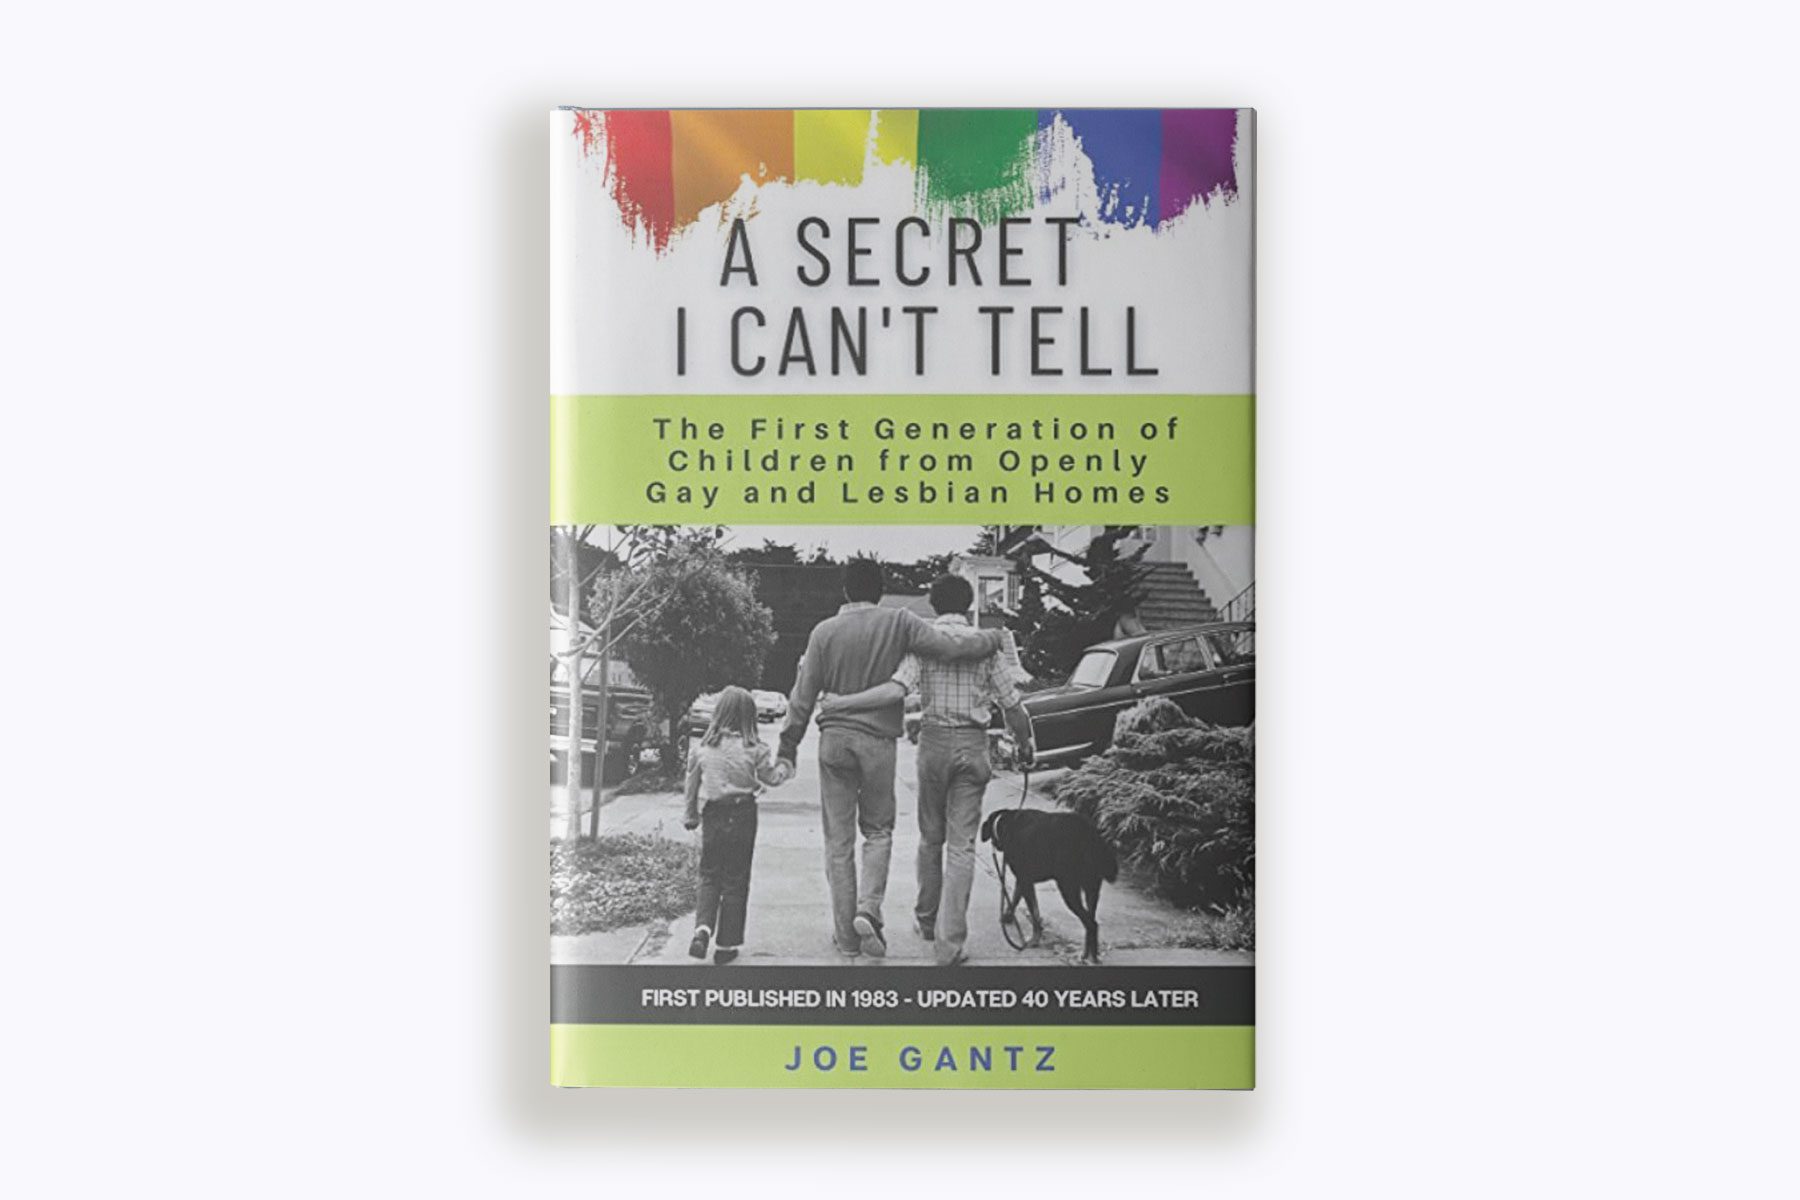 Cover of Joe Gantz' book "A Secret I Can't Tell: The First Generation of Children from Openly Gay and Lesbian Homes"